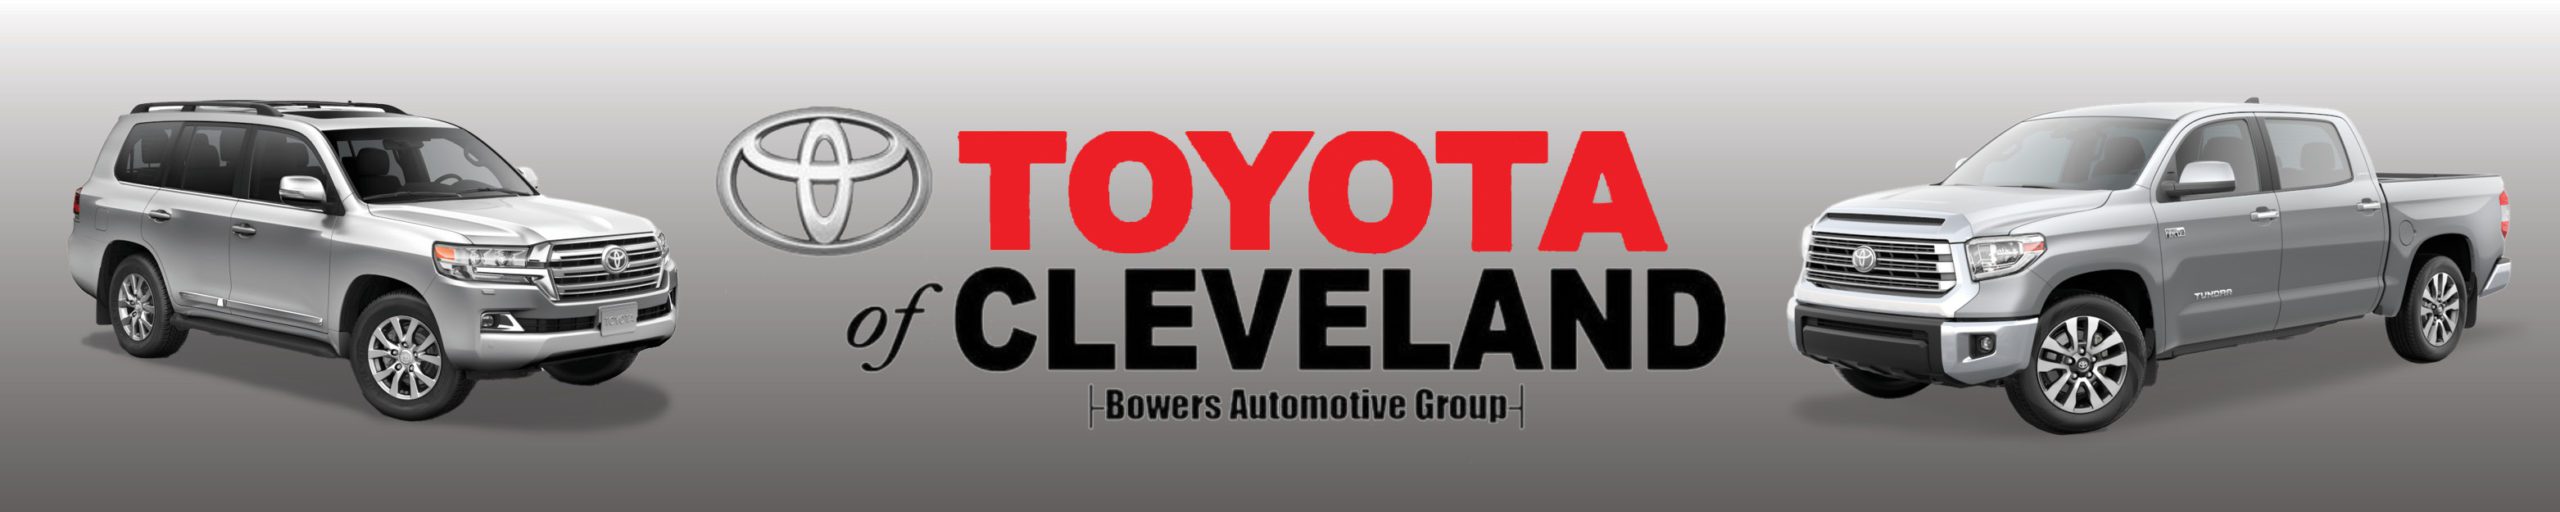 Toyota of Cleveland ad